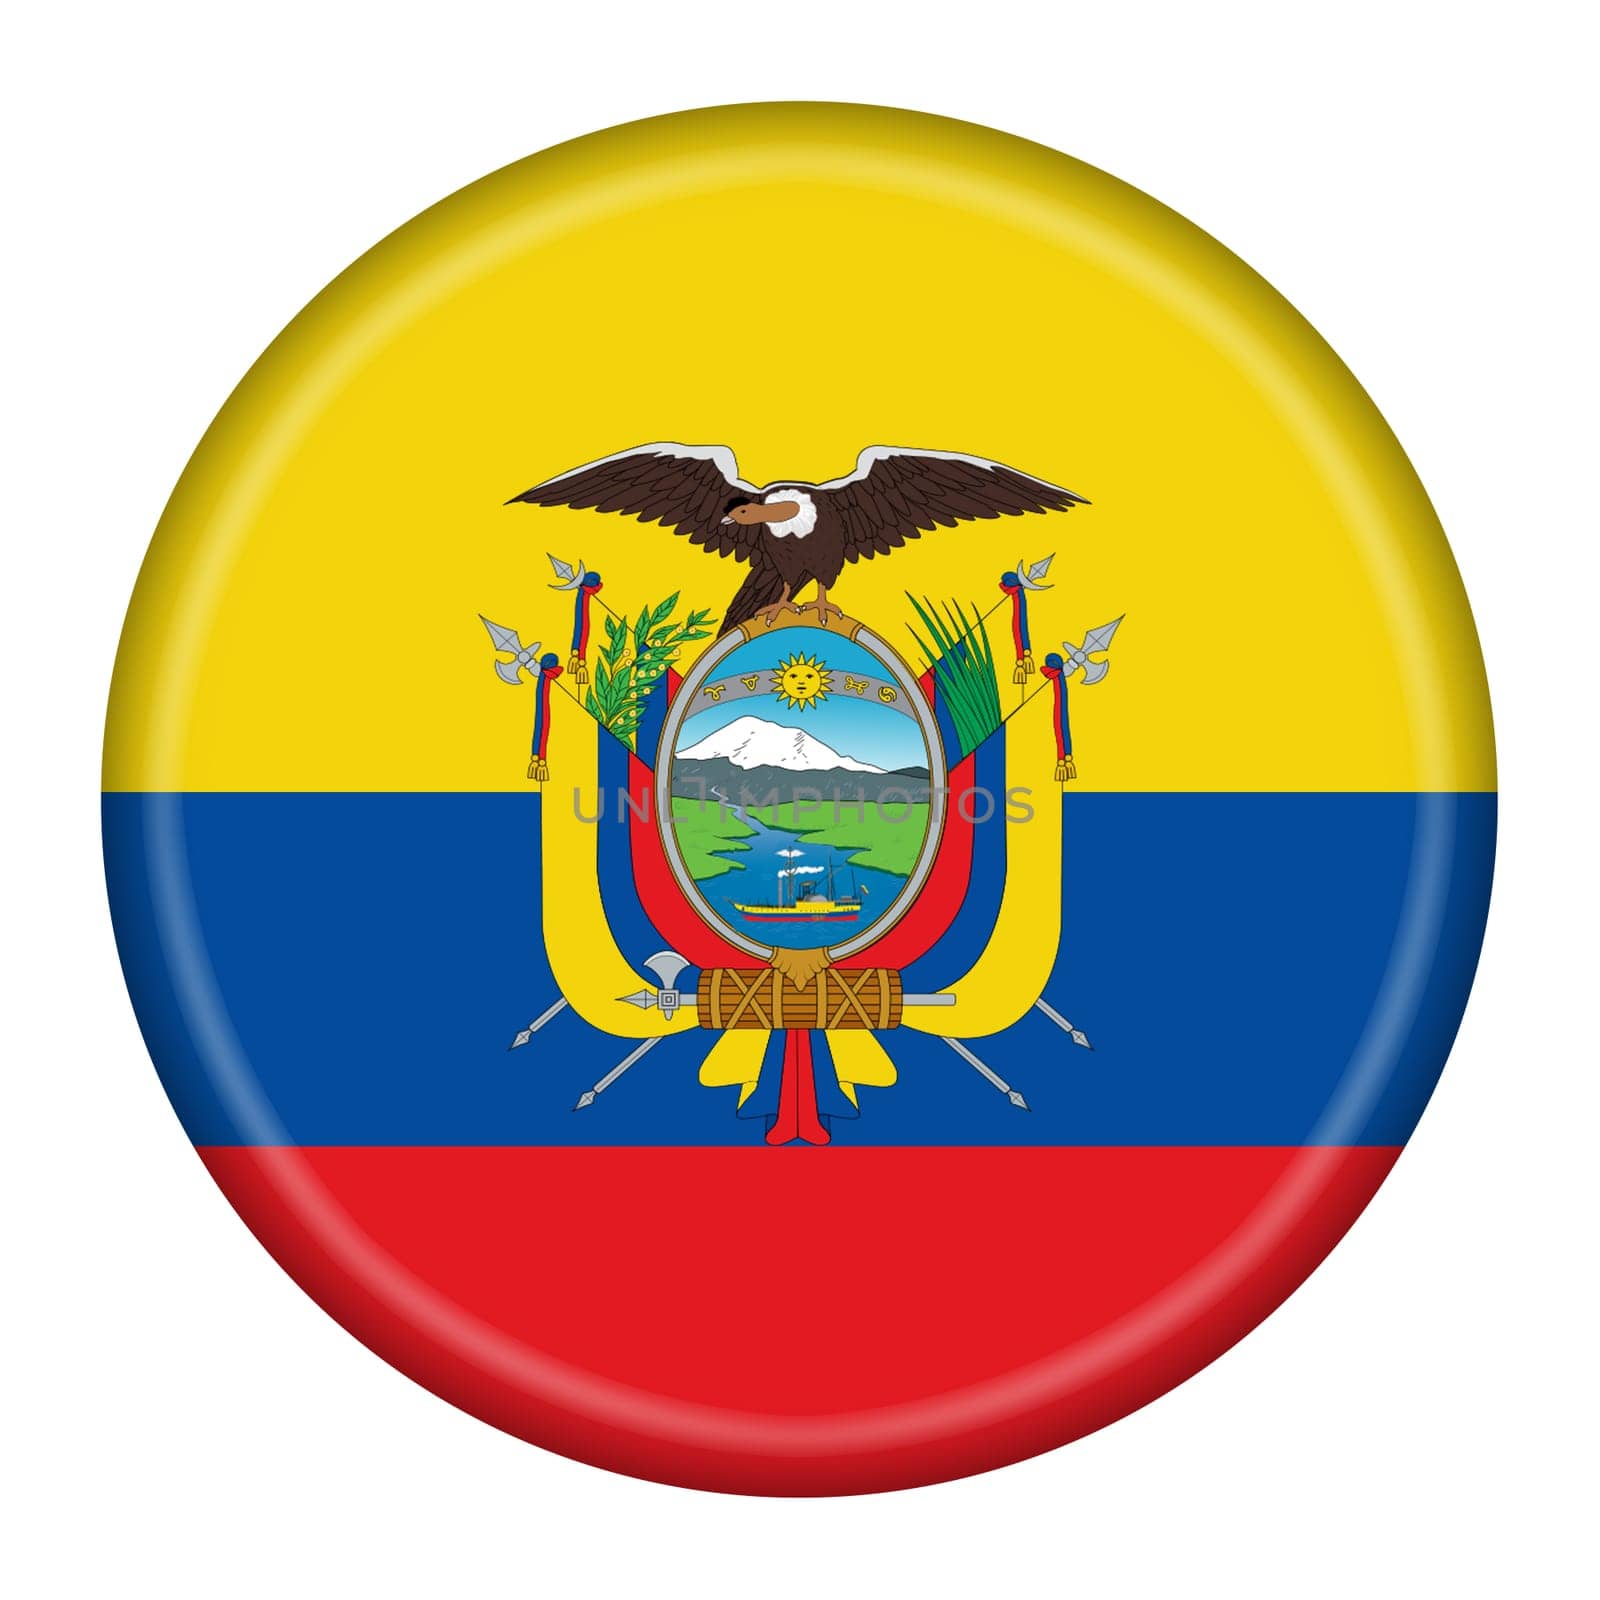 Ecuador flag button 3d illustration with clipping path by VivacityImages